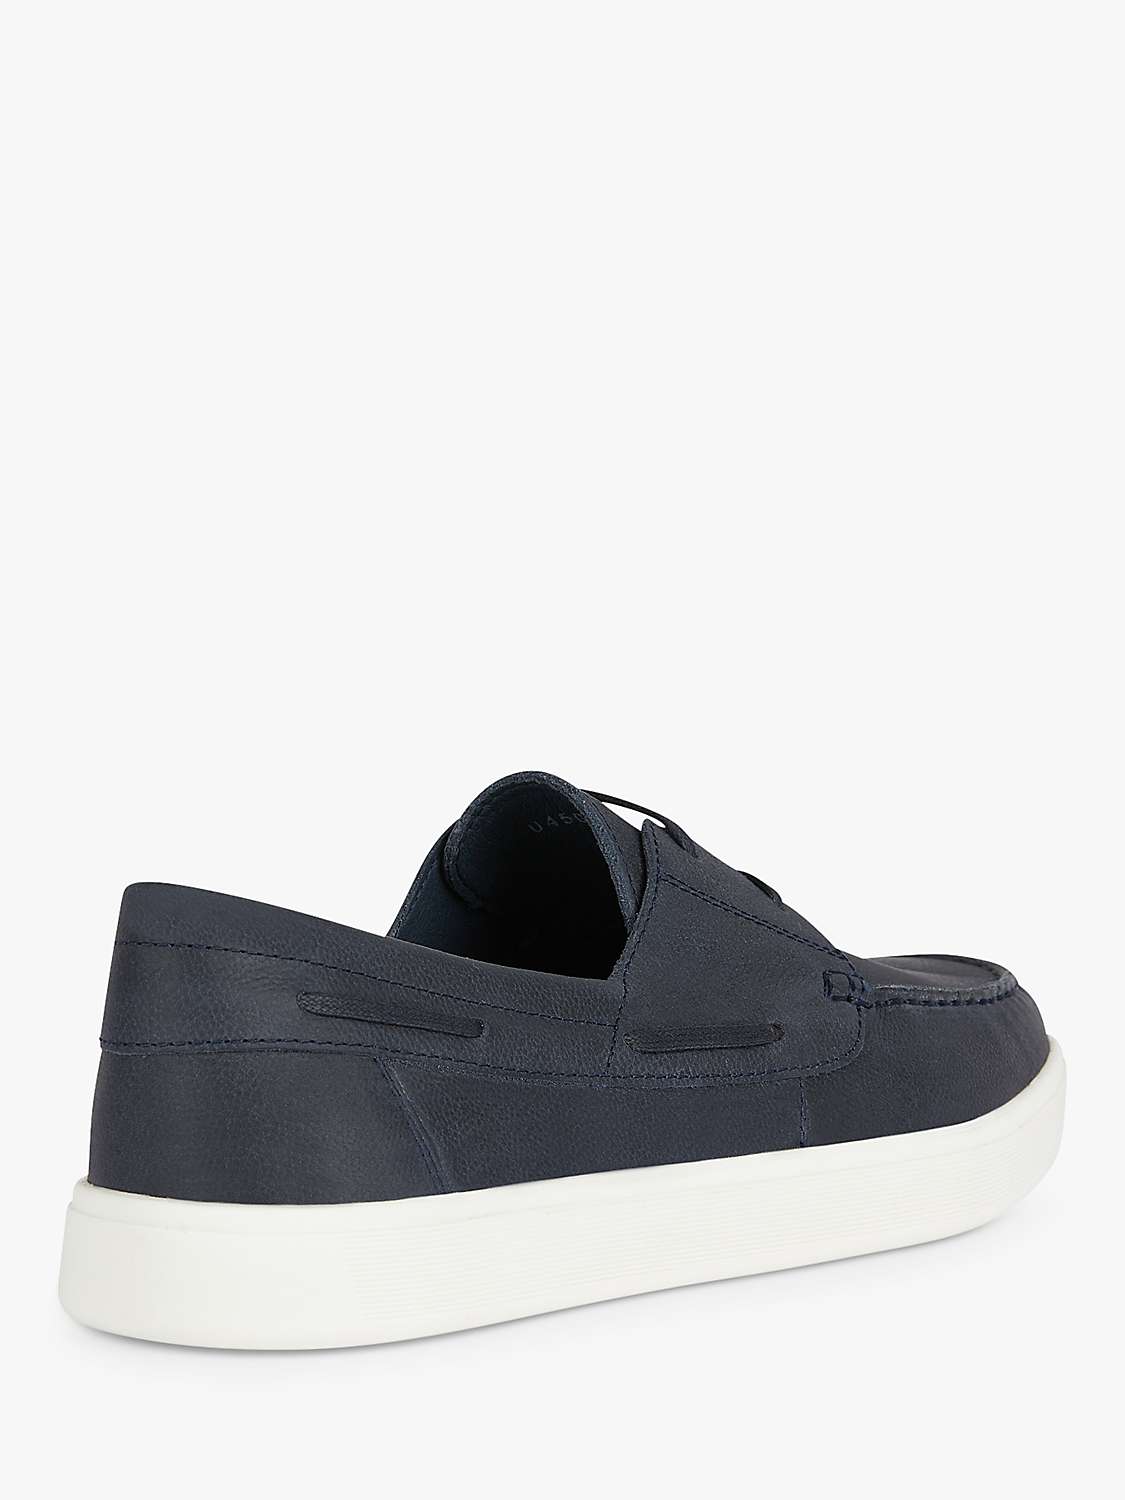 Buy Geox Avola Leather Loafers, Navy Online at johnlewis.com